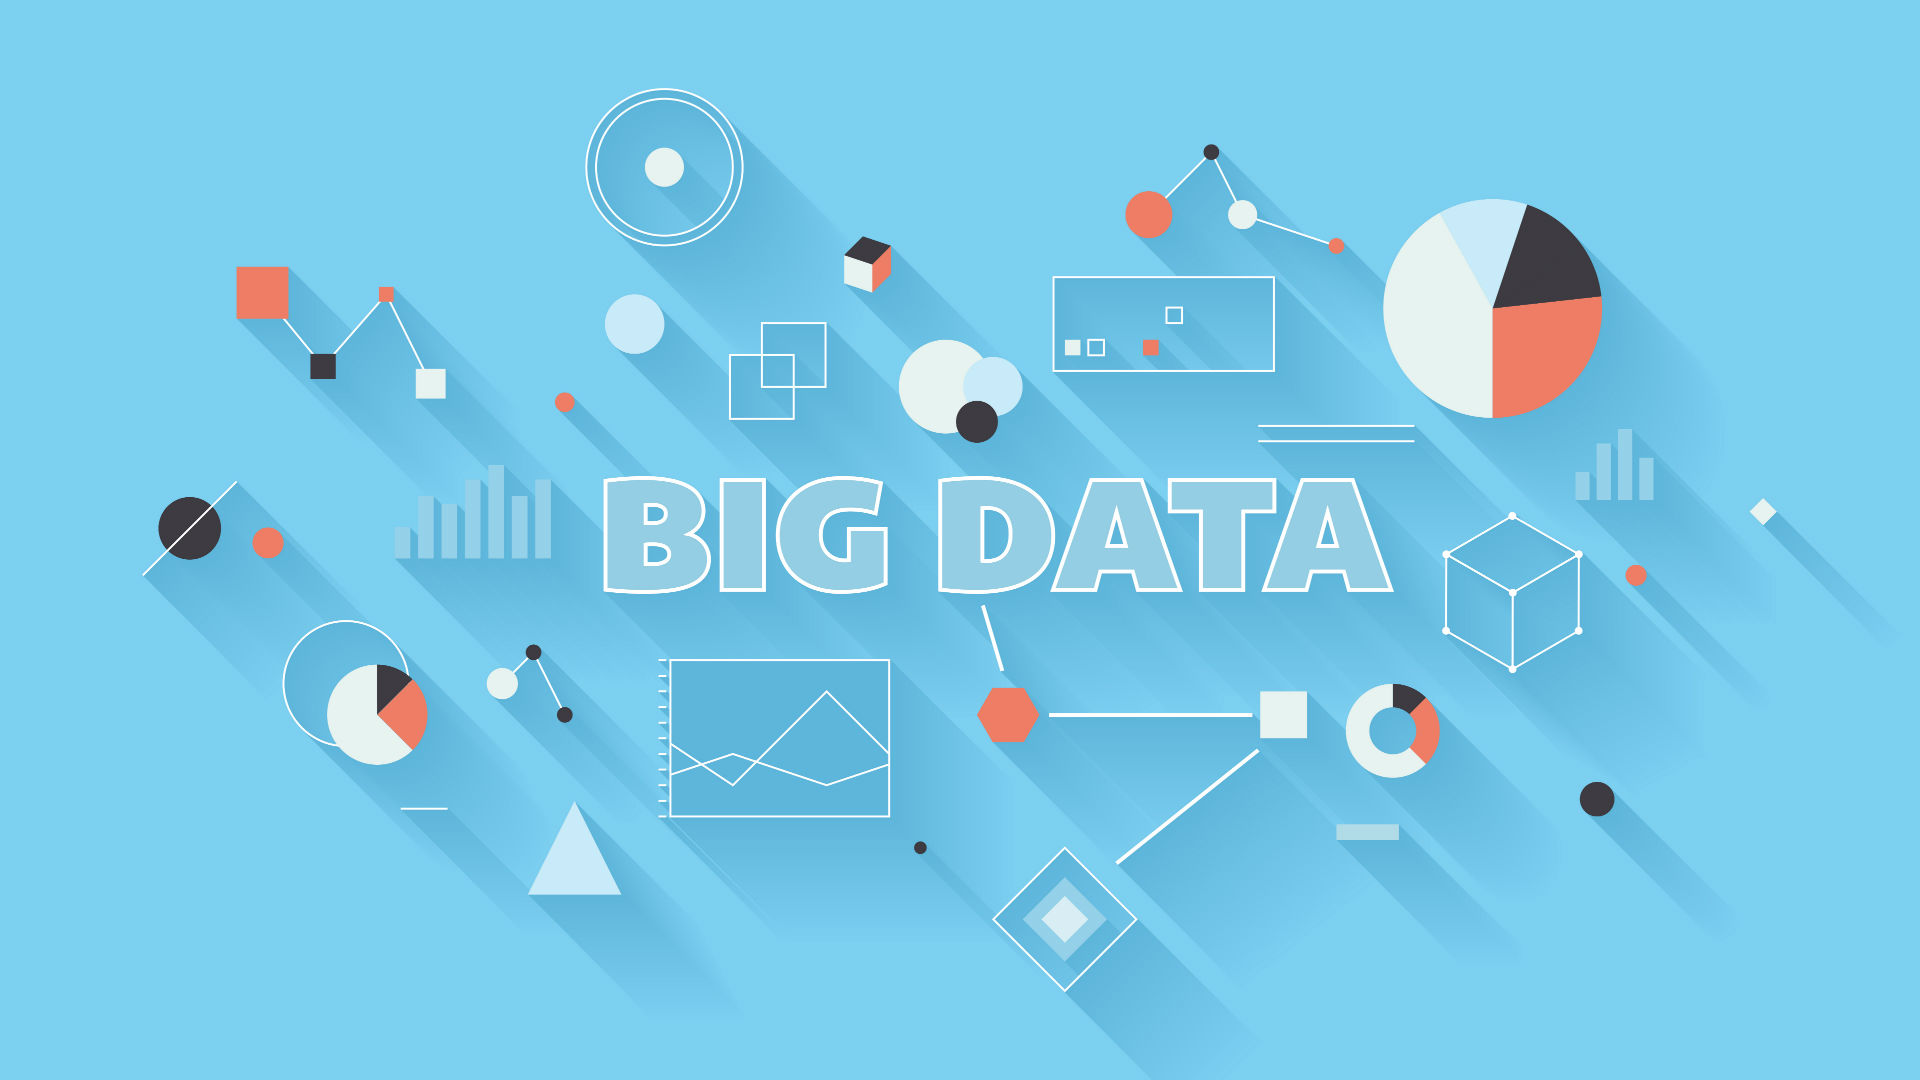 Big Data Analytics Advantages. How will it impact the future